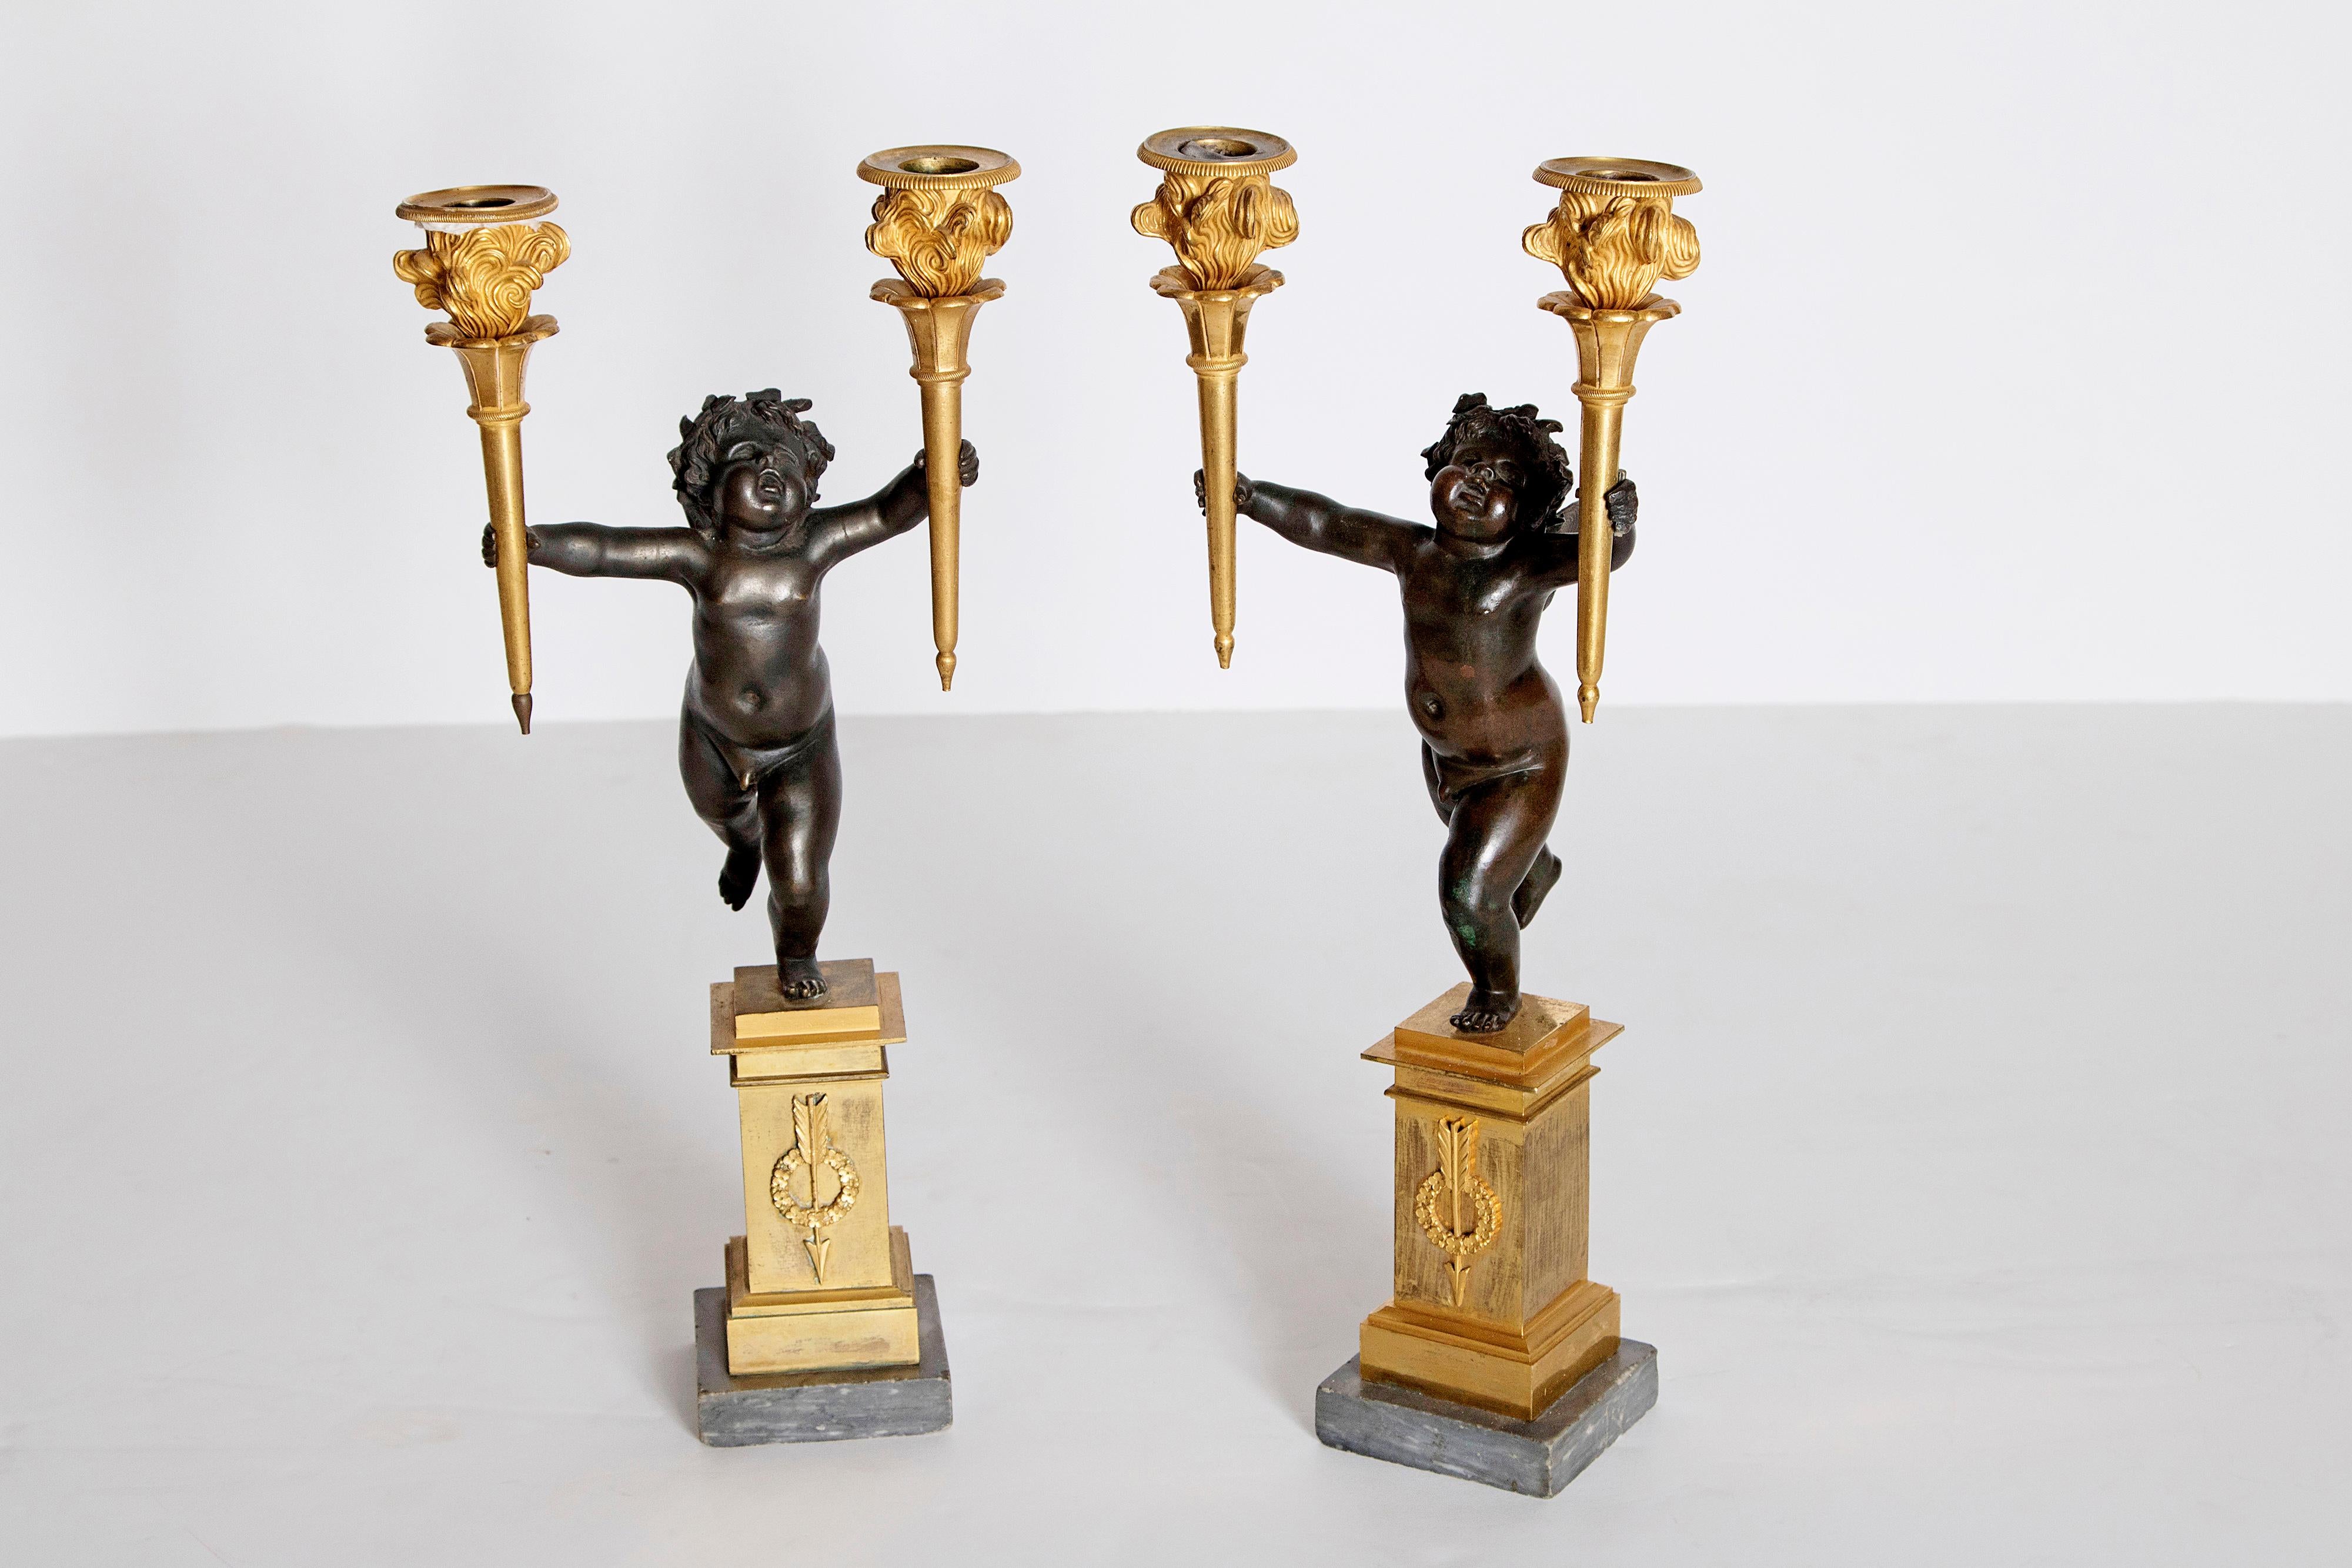 Pair of French Charles X Patinated Bronze and Gilt Figurative Candelabras For Sale 7